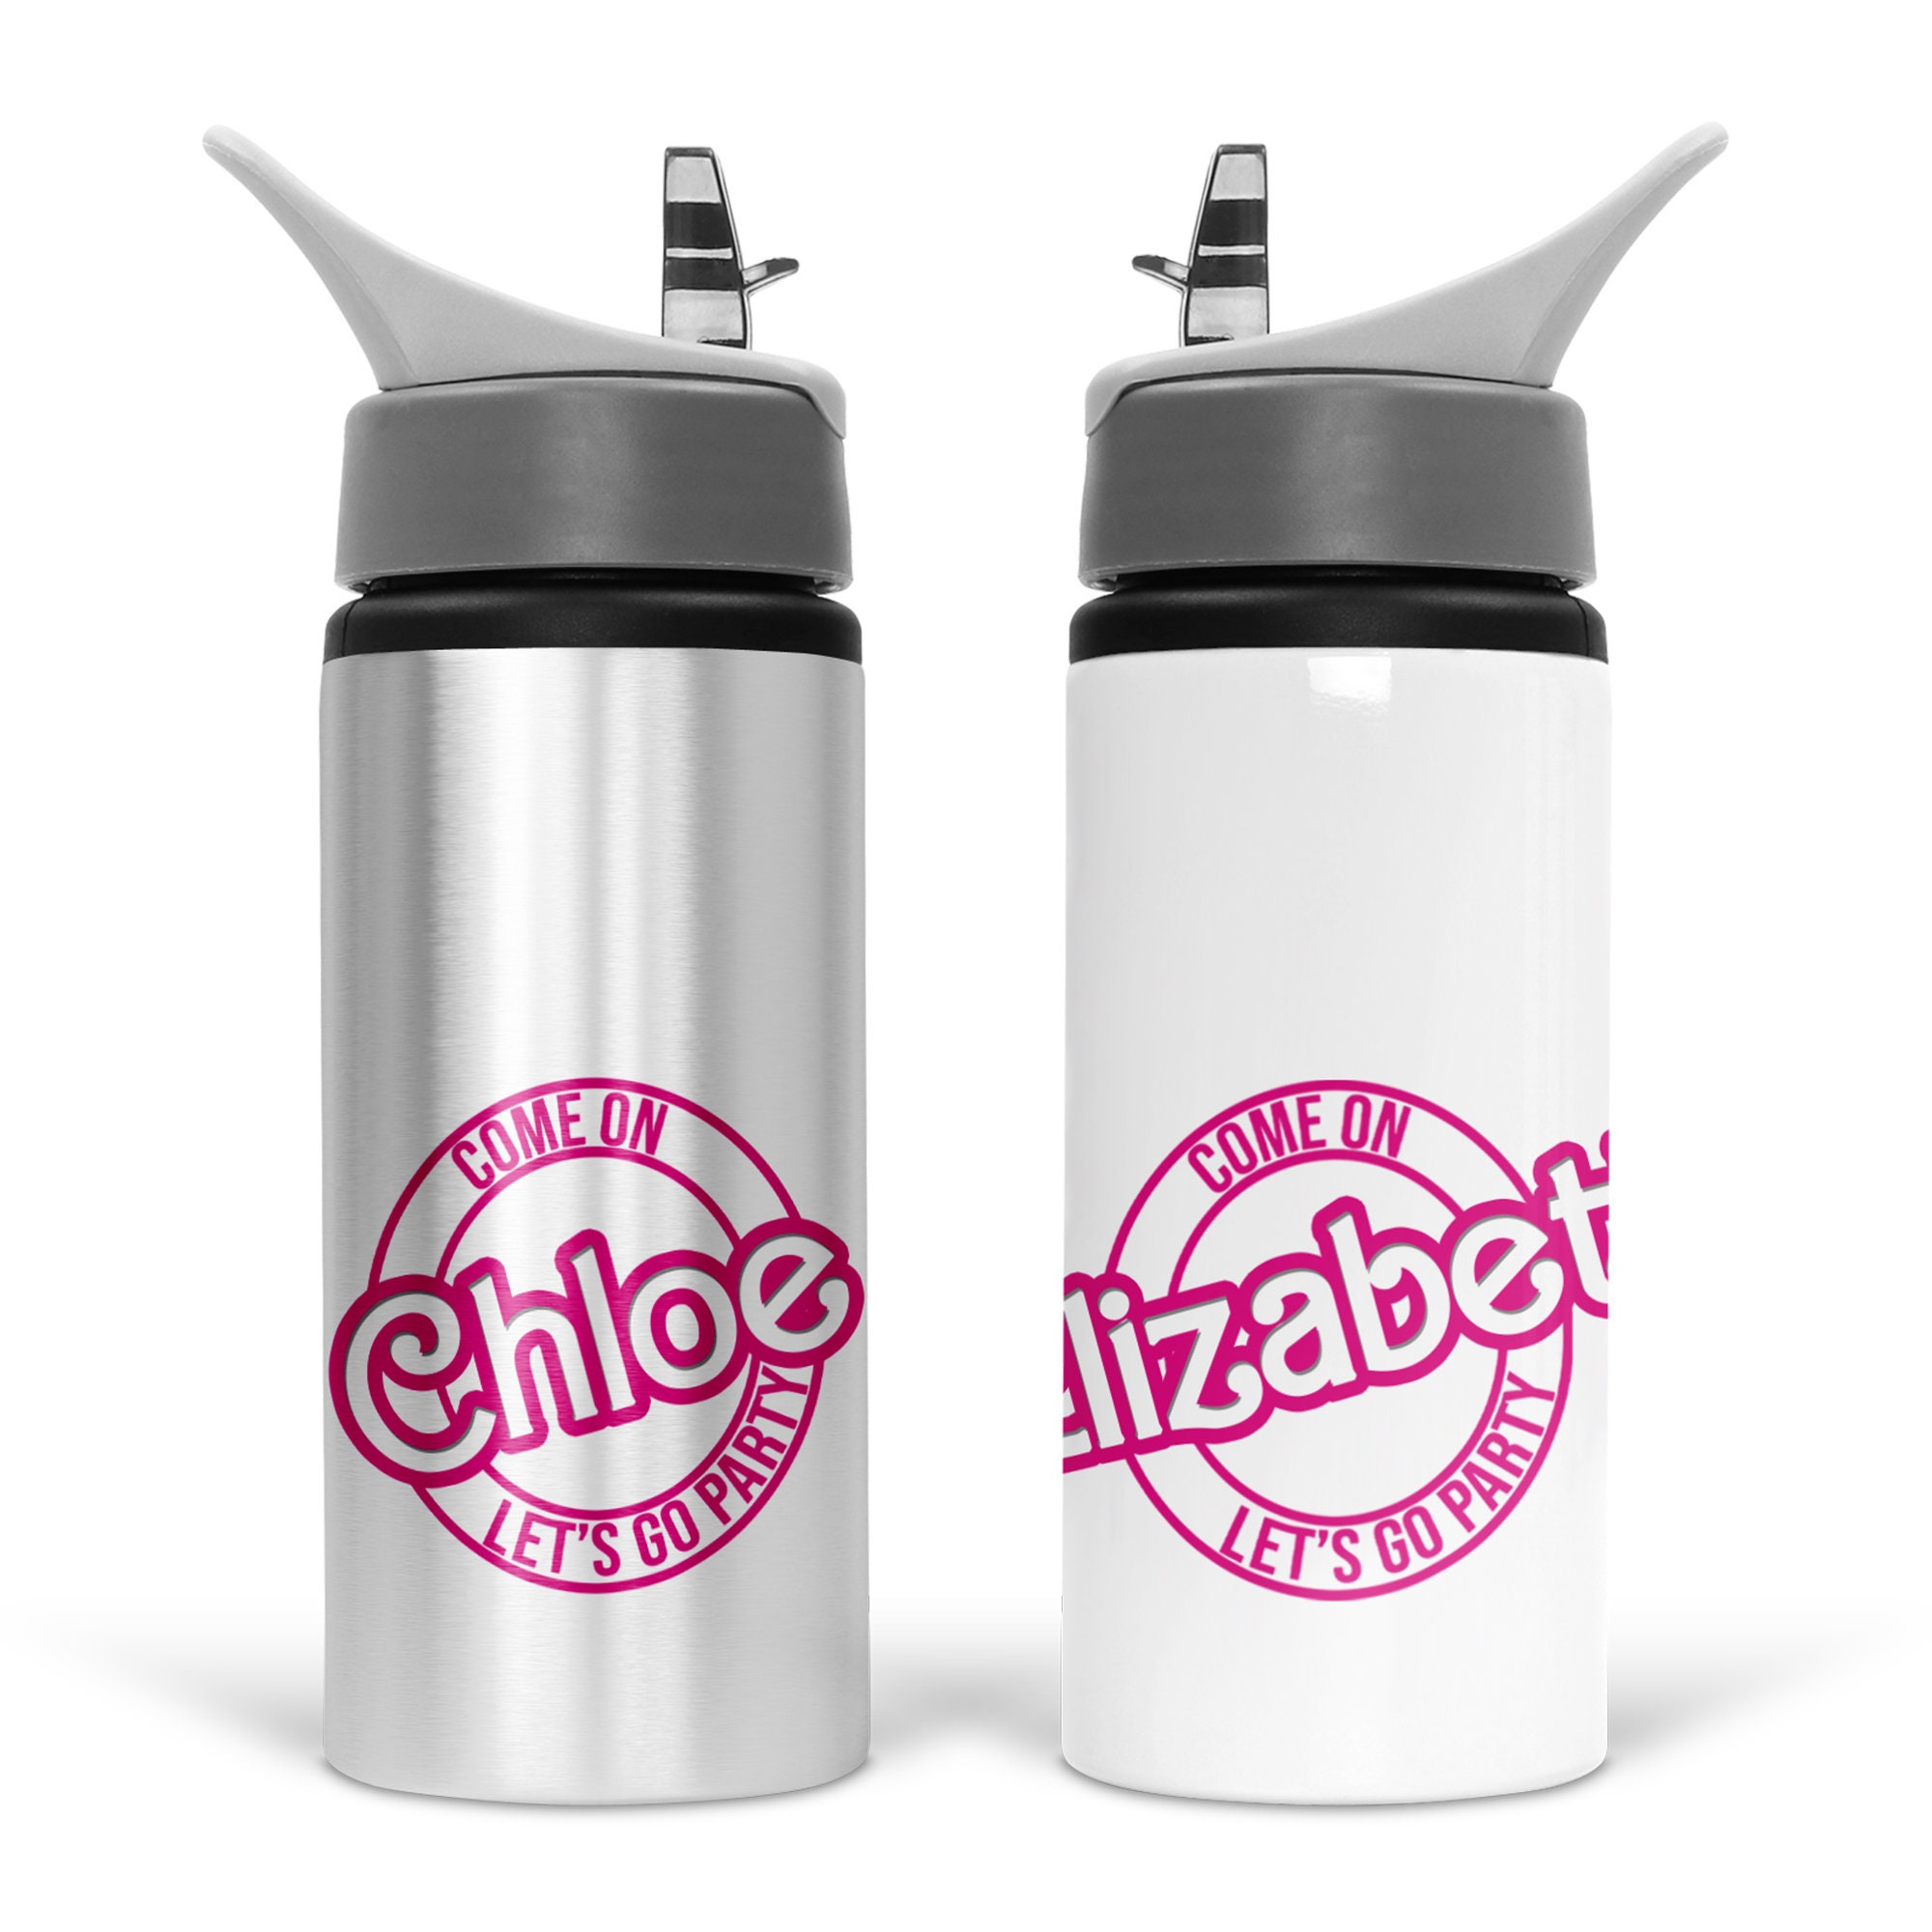 White Blank Sublimation Water Bottle with Carabiner Aluminum Leakproof  Kettle 